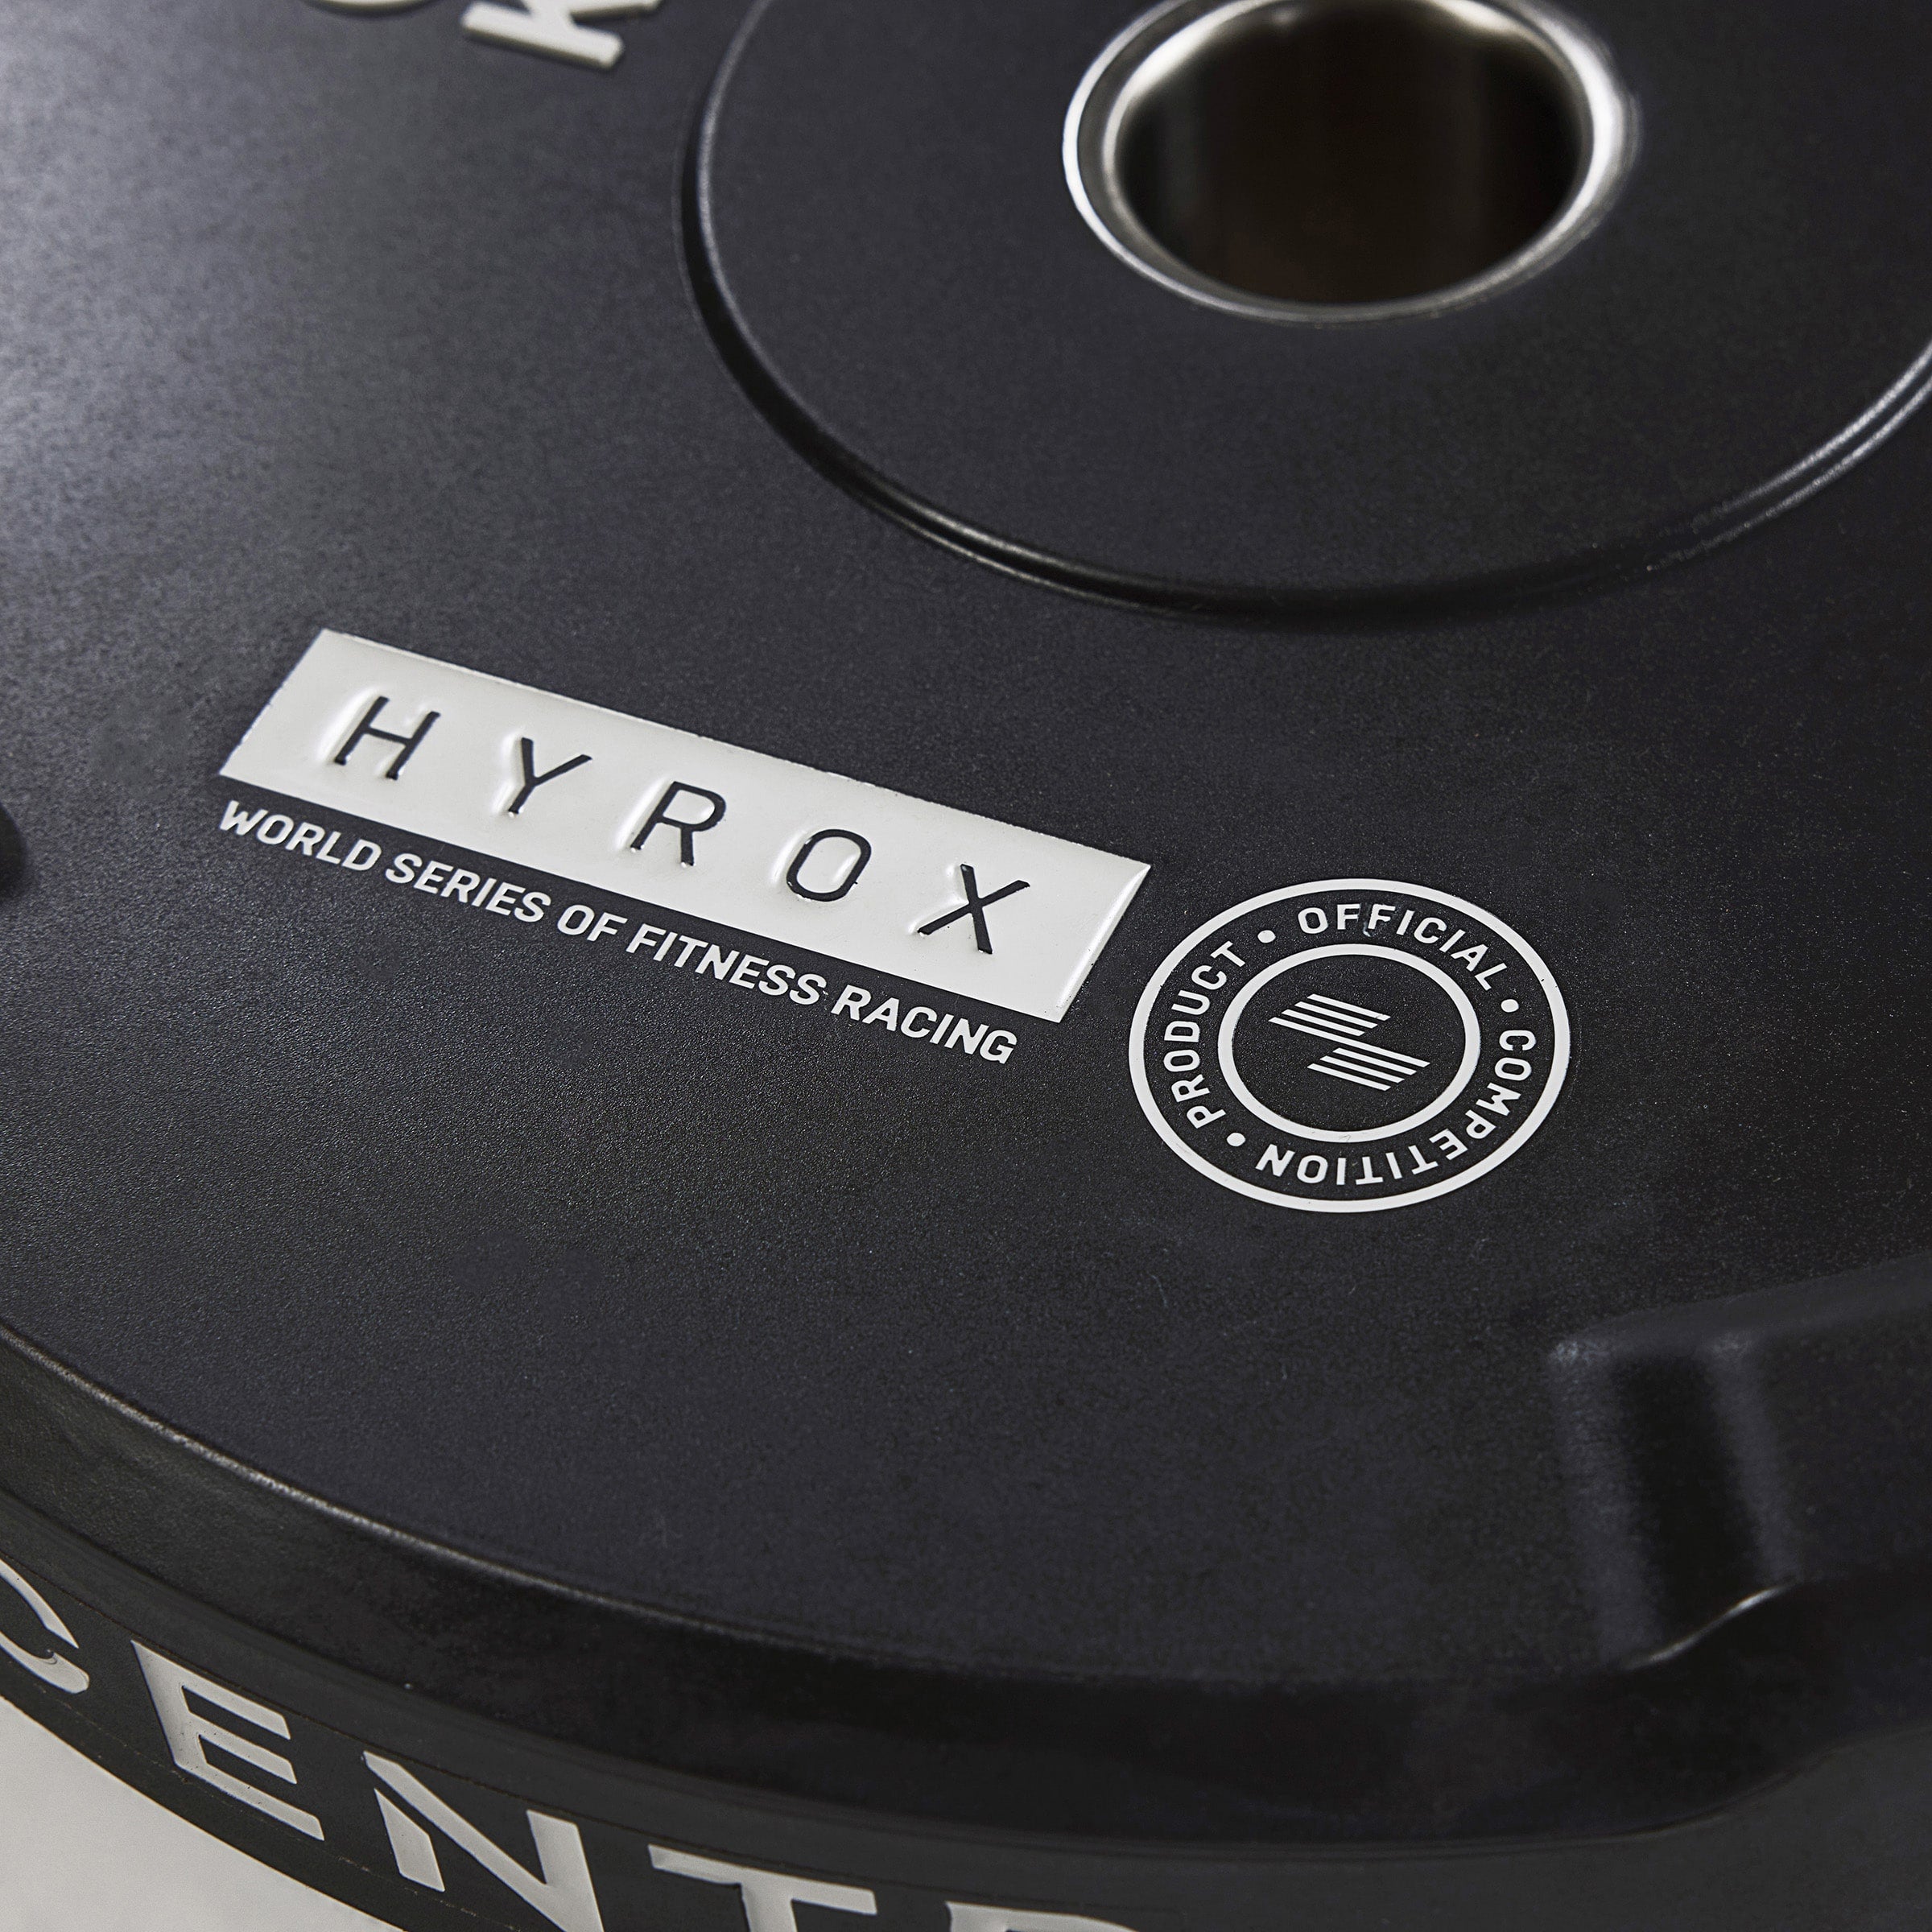 CENTR x HYROX Competition Edge 25kg Bumper Plate (SHIPPING EARLY MAY)